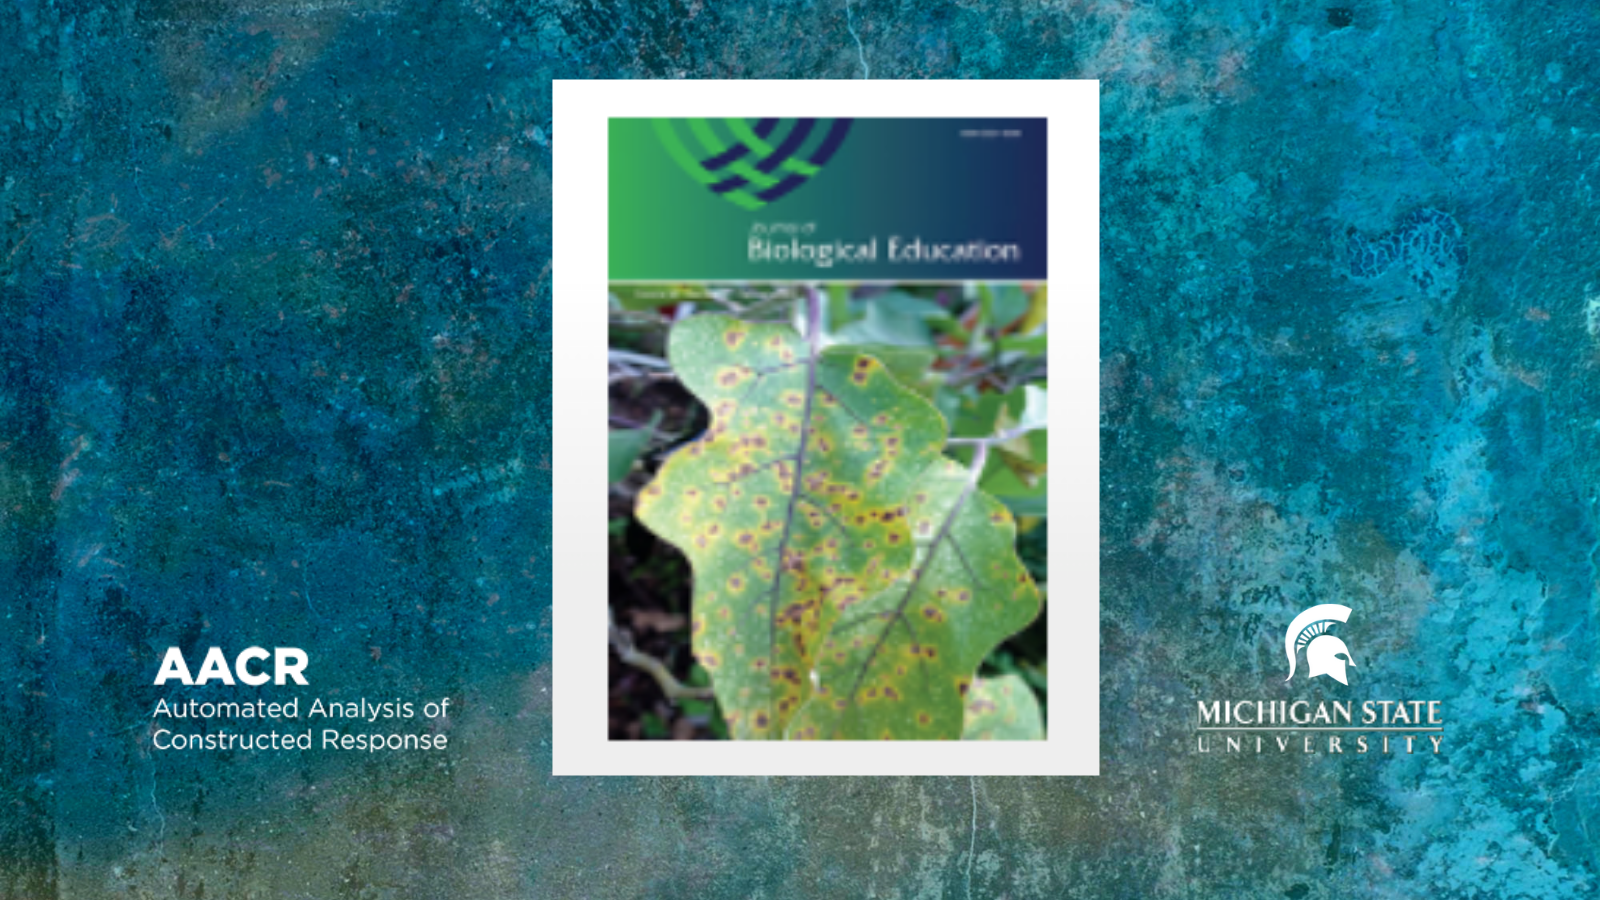 AACR logo, photo of cover of Journal of Biological Education, MSU logo